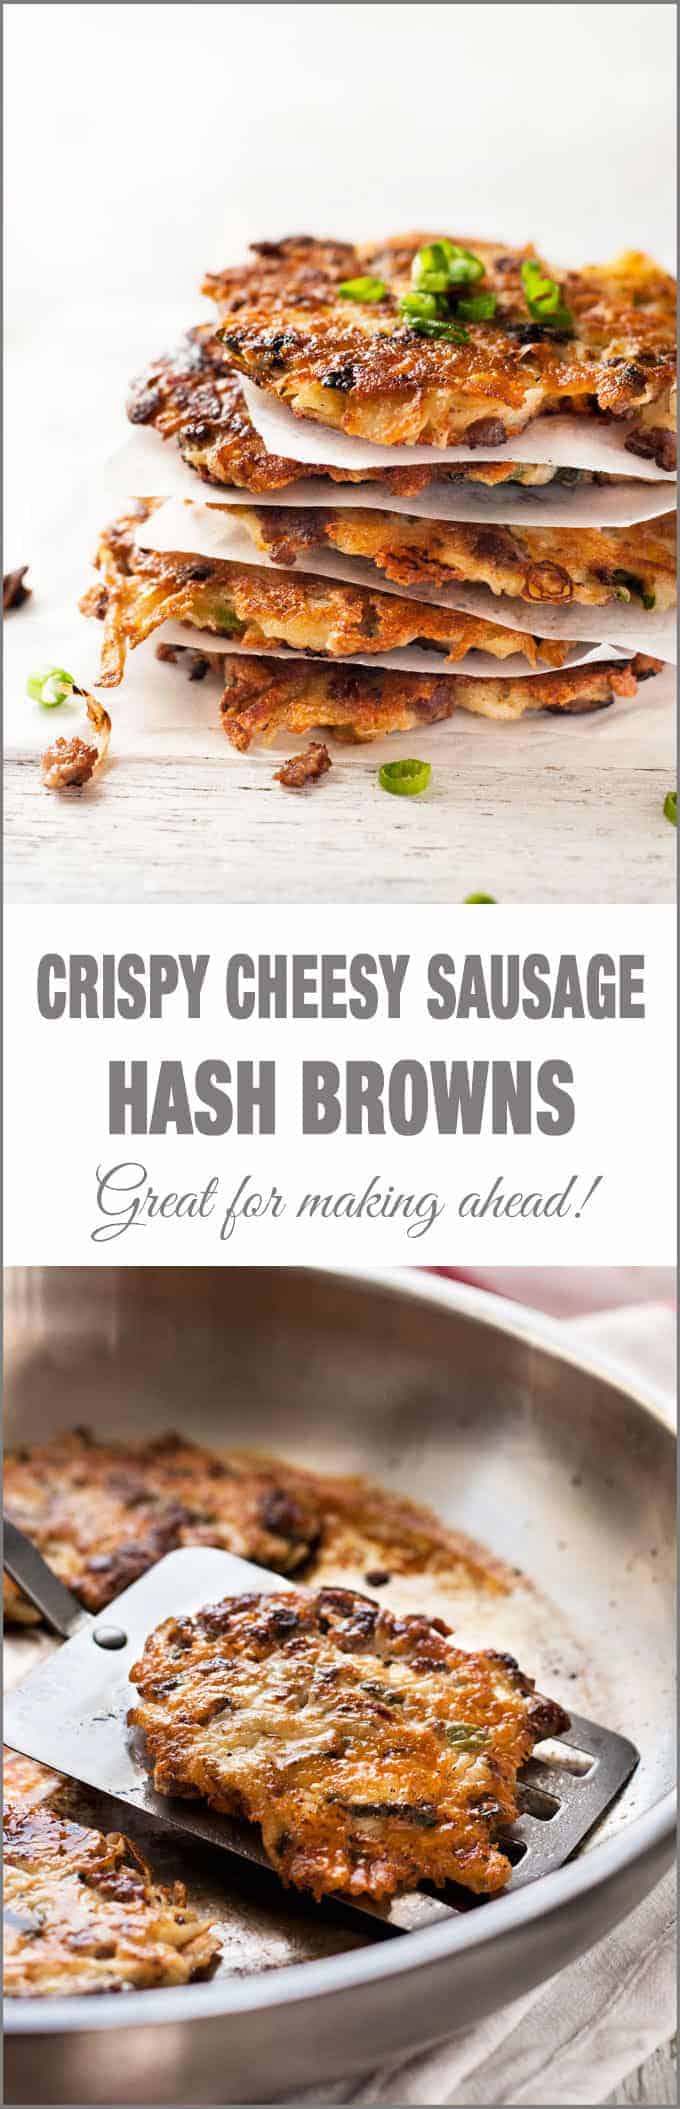 Crispy Cheesy Sausage Hash Browns - a step up from the usual hash browns! Great for making ahead.